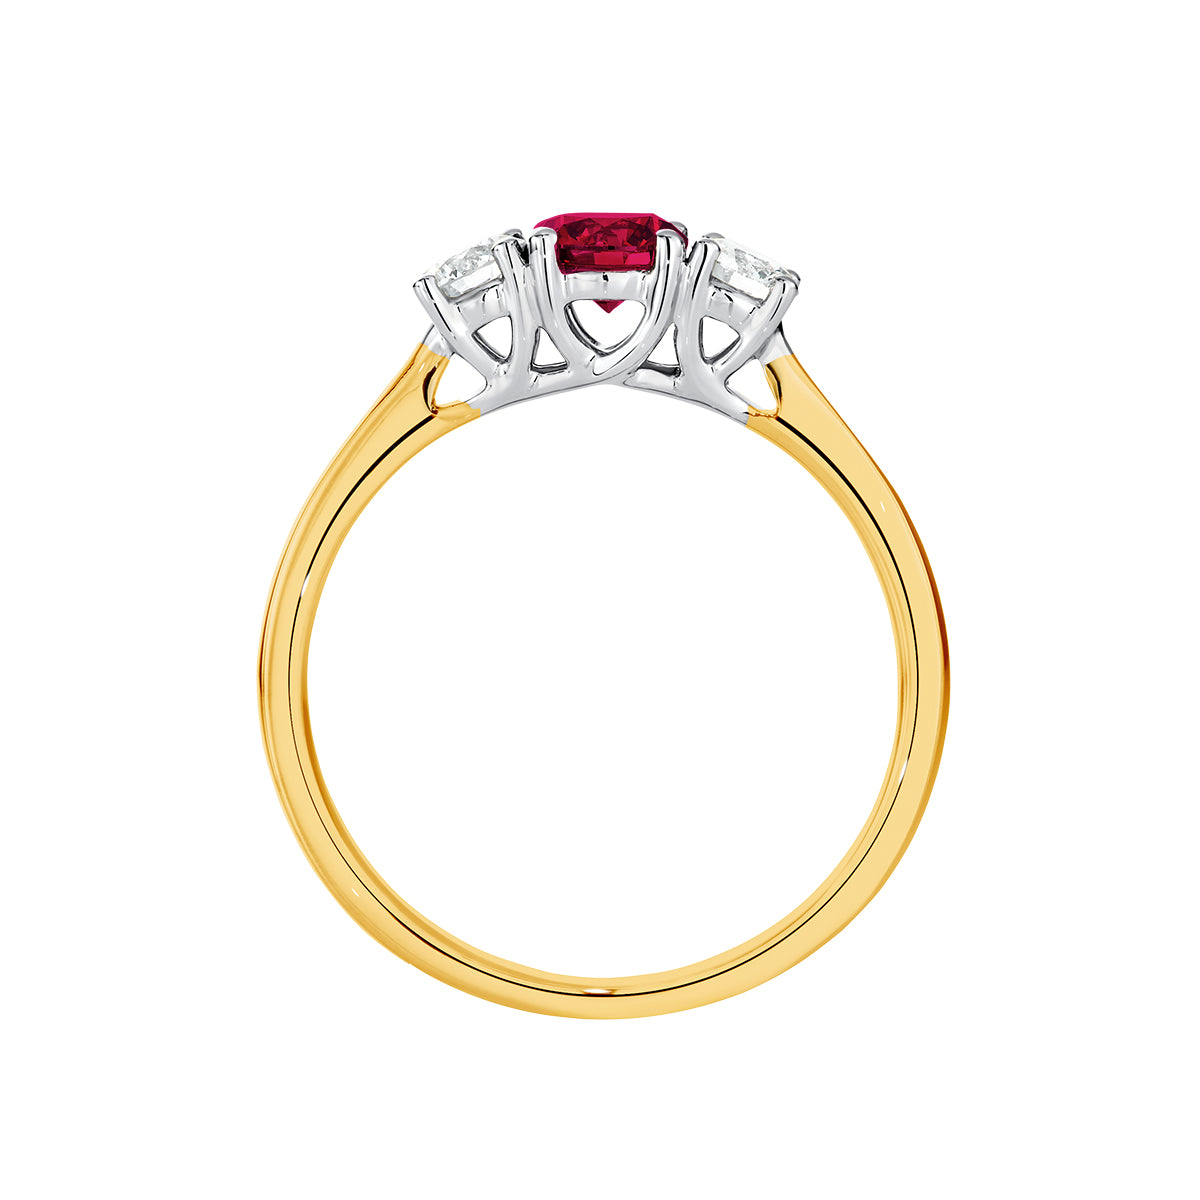 Natural 0.55ct round ruby and 0.32ct diamond trilogy ring in 18ct yellow and white gold